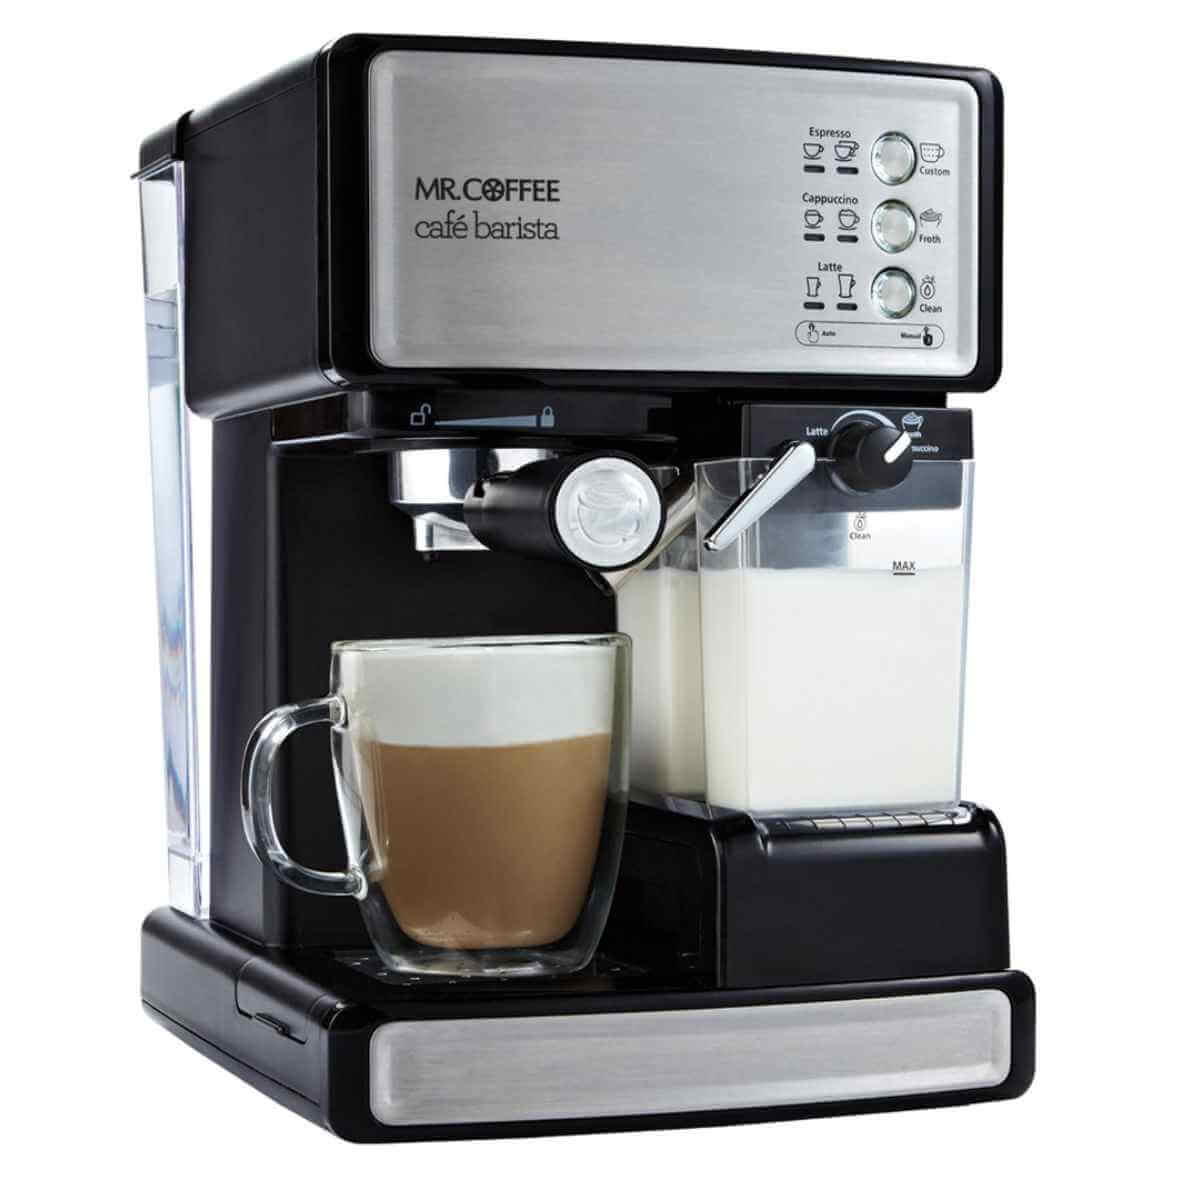 Mr. Coffee Cafe Barista best fully automatic